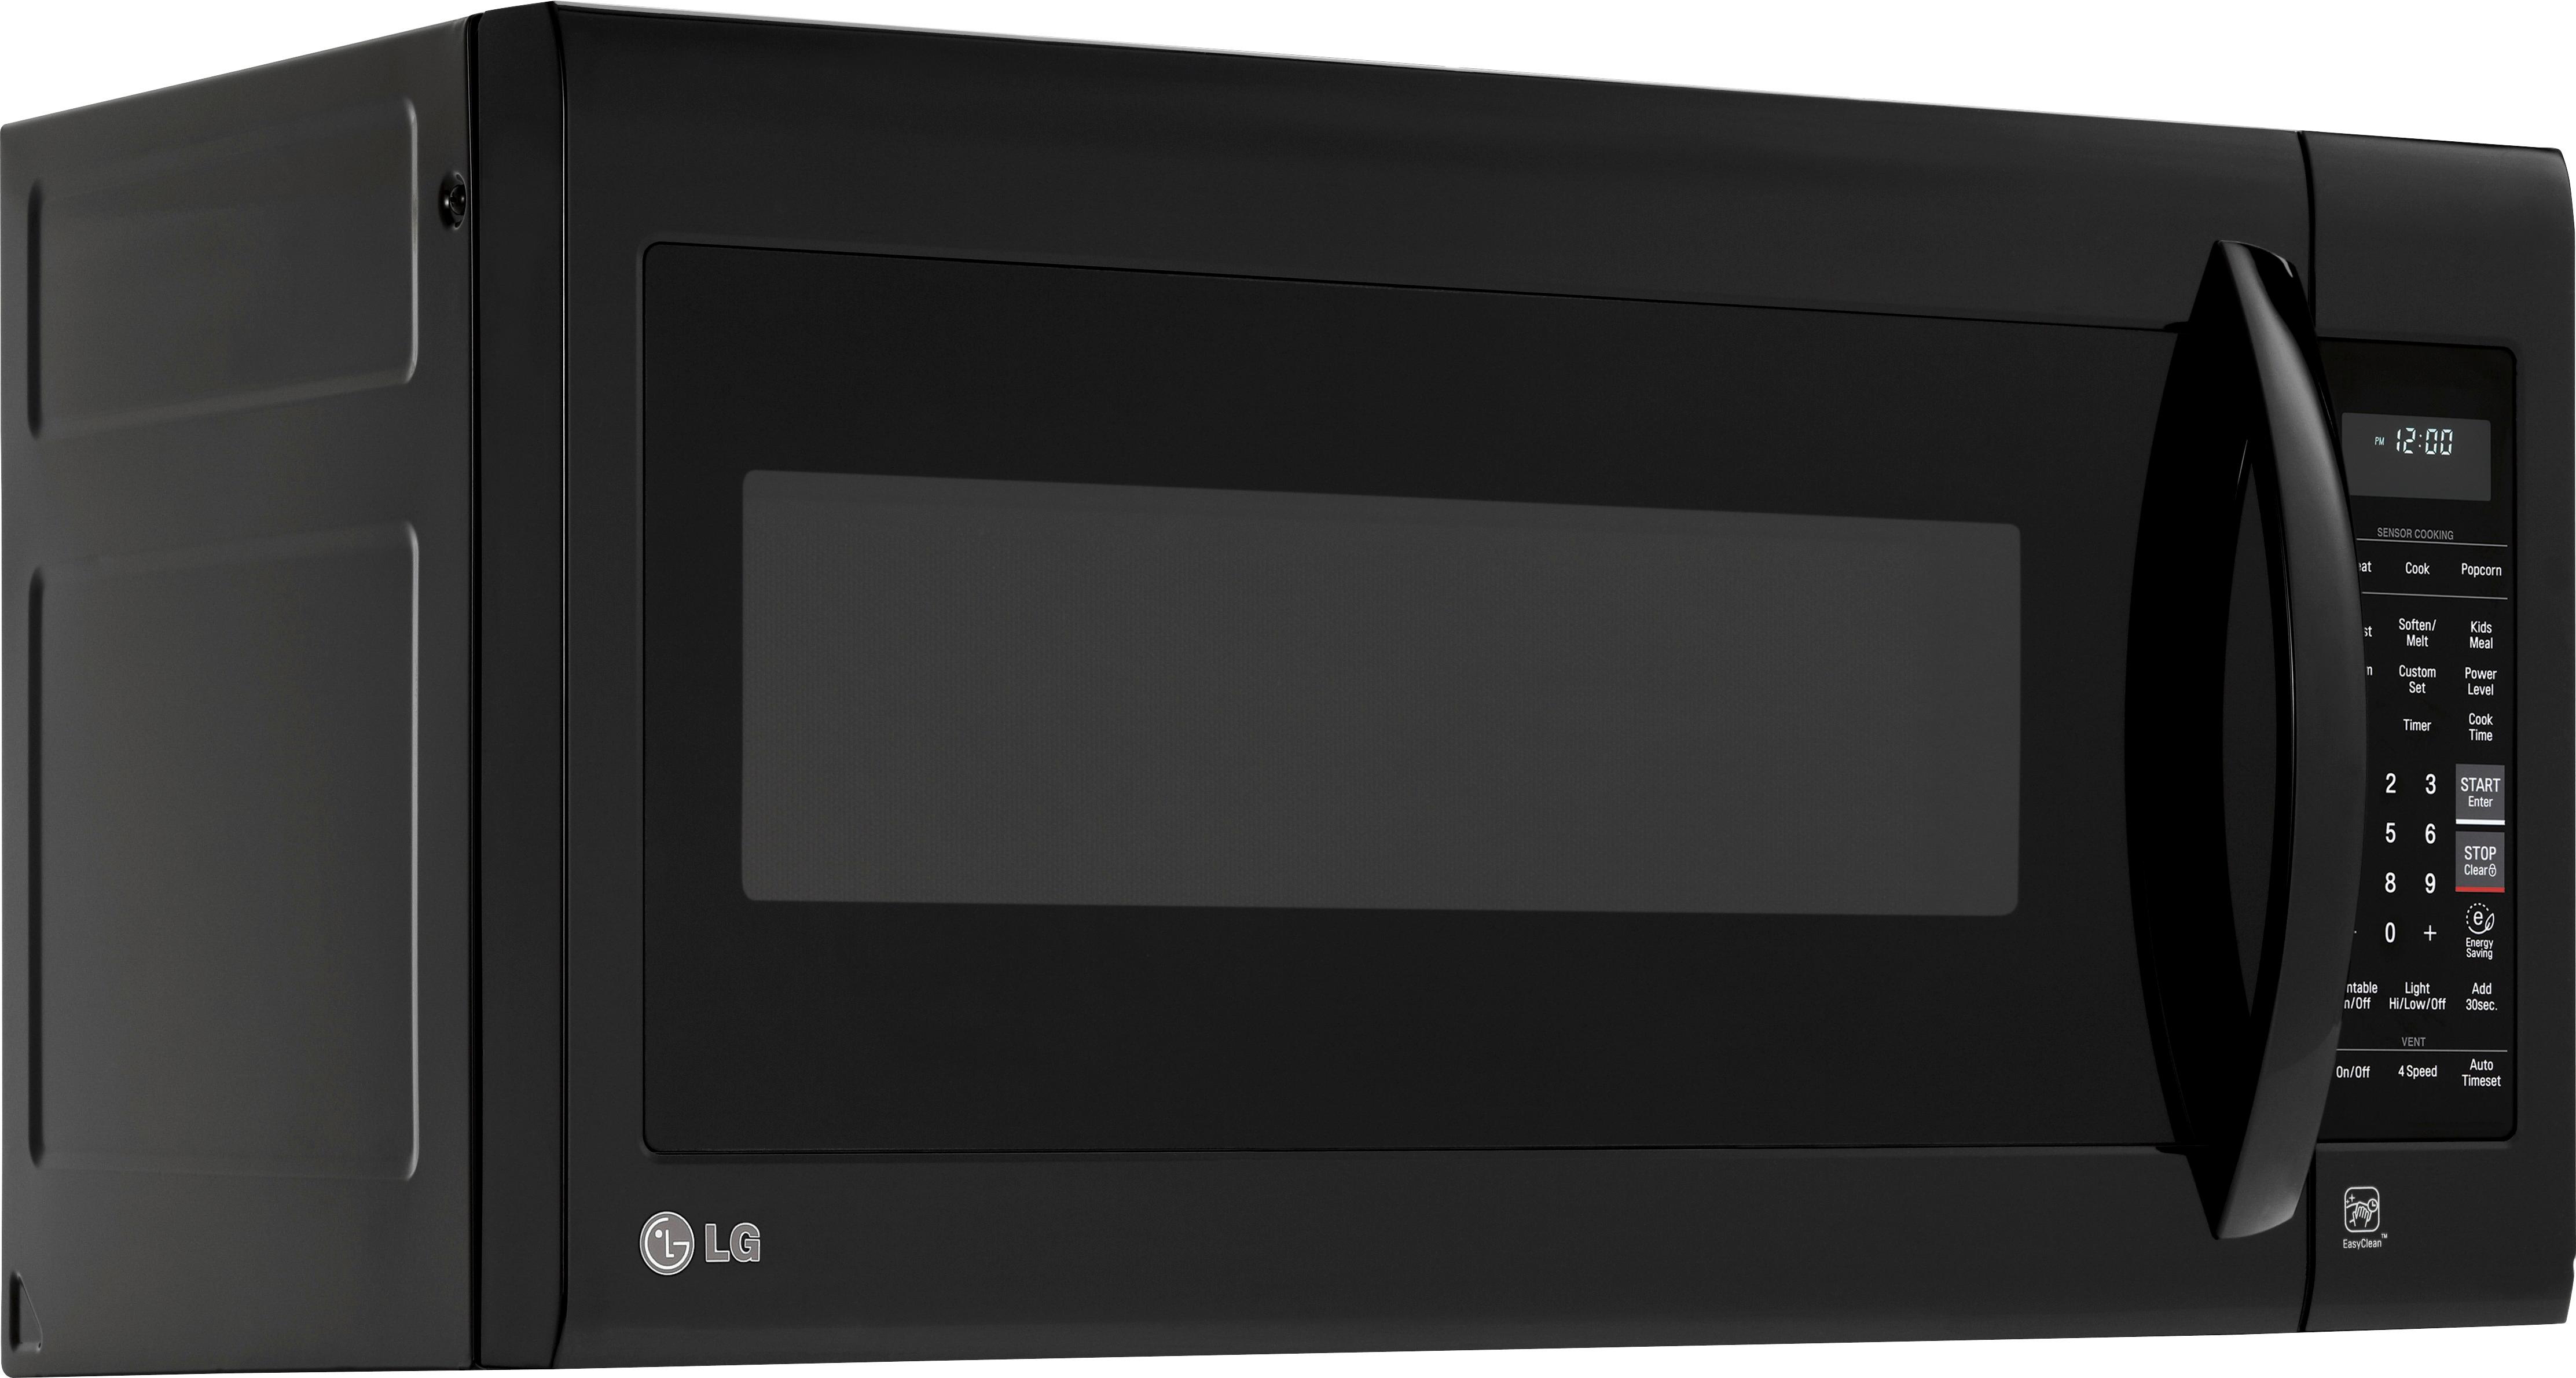 Angle View: LG - 2.0 Cu. Ft. Over-the-Range Microwave - Smooth Black